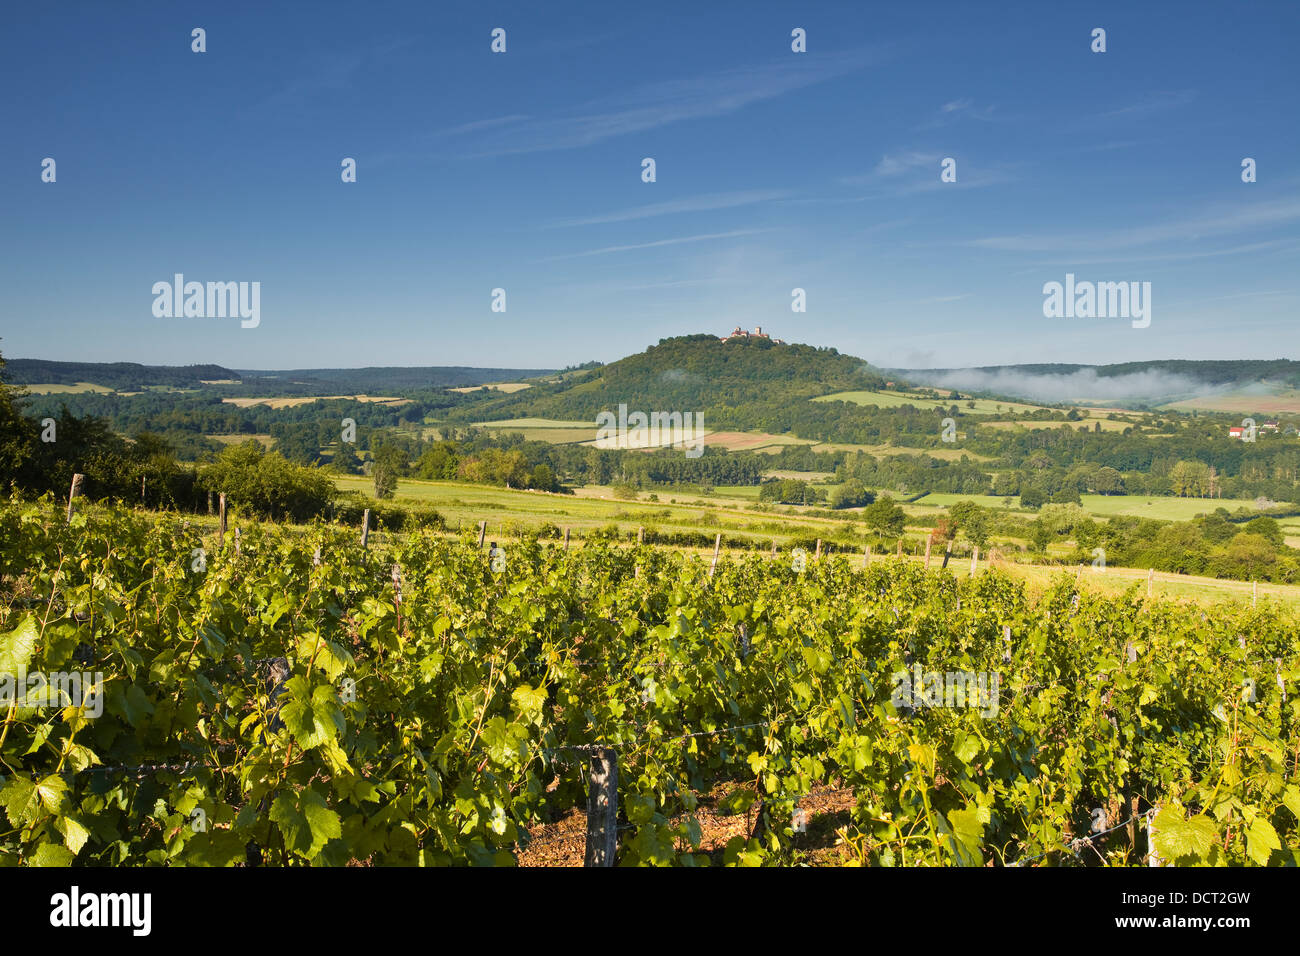 Vineyards near to the hilltop village of Vezelay in the Yonne area of Burgundy. Stock Photo